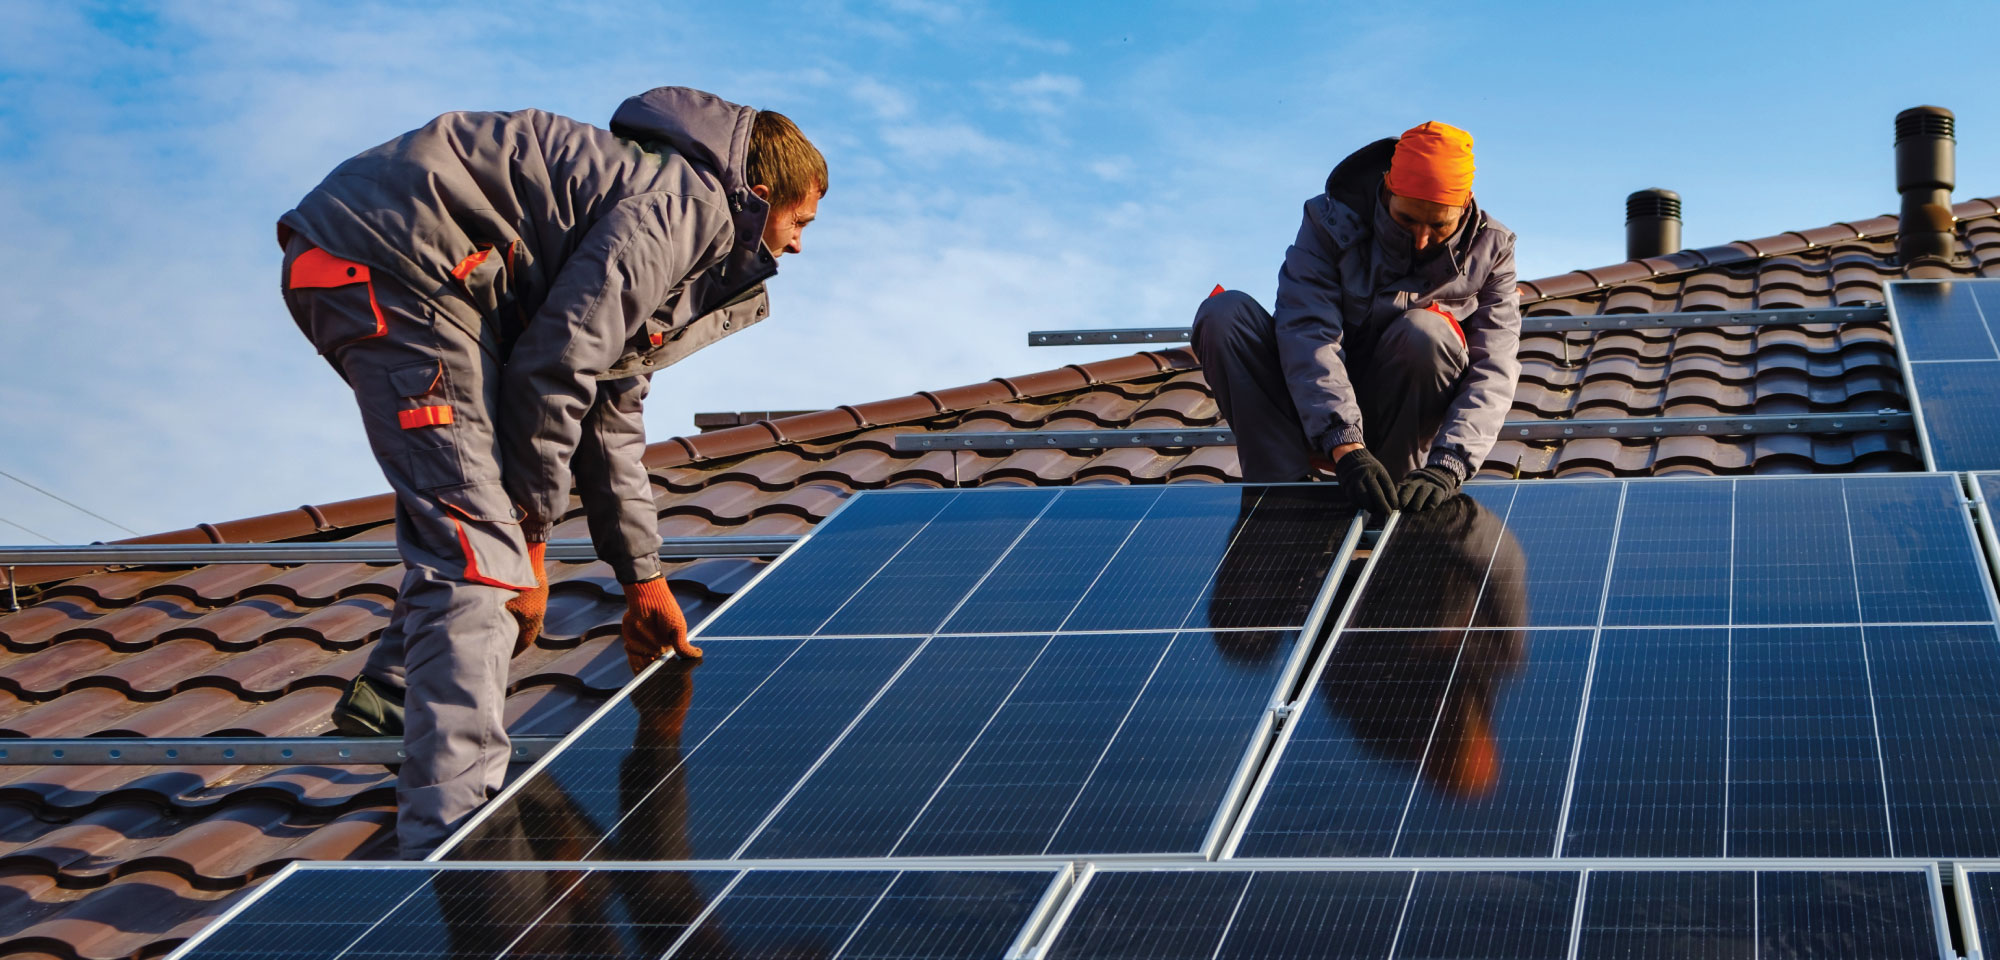 What residential solar installers need to stop doing immediately